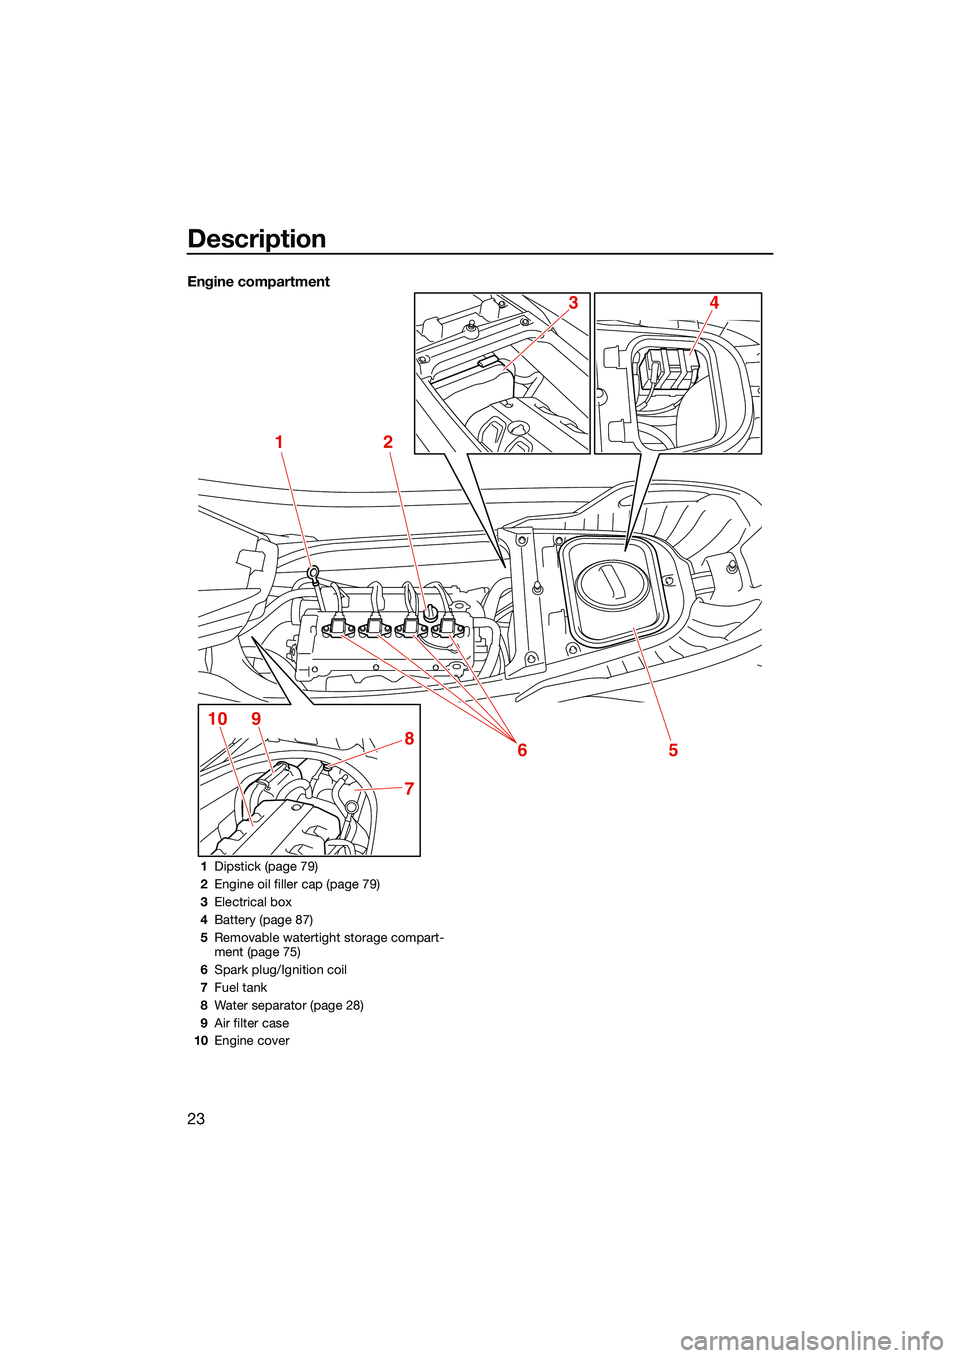 YAMAHA FX SVHO 2022  Owners Manual Description
23
Engine compartment
12
5
7
8
9106
43
1Dipstick (page 79)
2 Engine oil filler cap (page 79)
3 Electrical box
4 Battery (page 87)
5 Removable watertight storage compart-
ment (page 75)
6 S